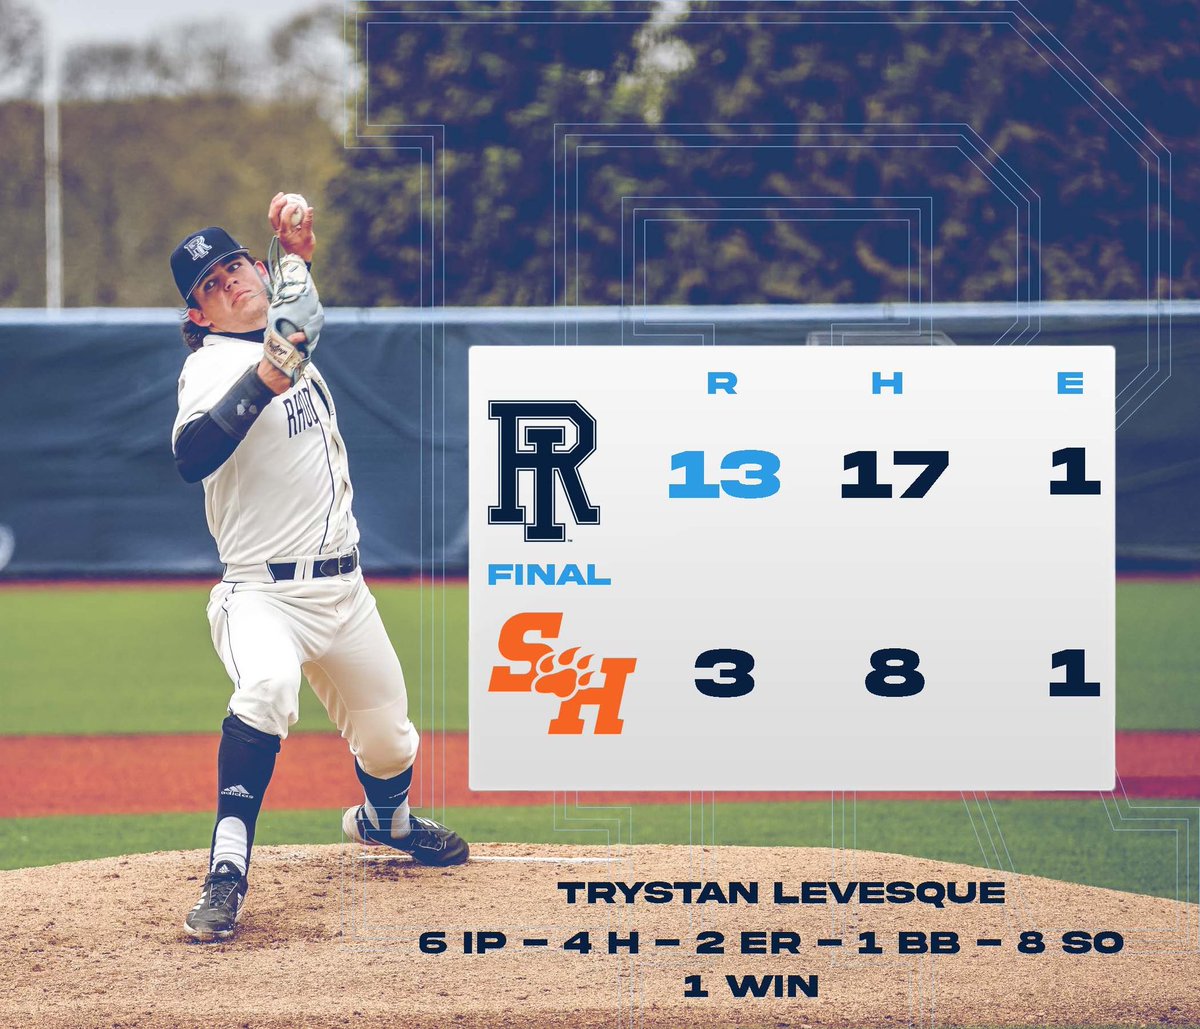 Great Team Win Today! We have another tomorrow afternoon at 1 p.m. CST! Go Rhody!!!